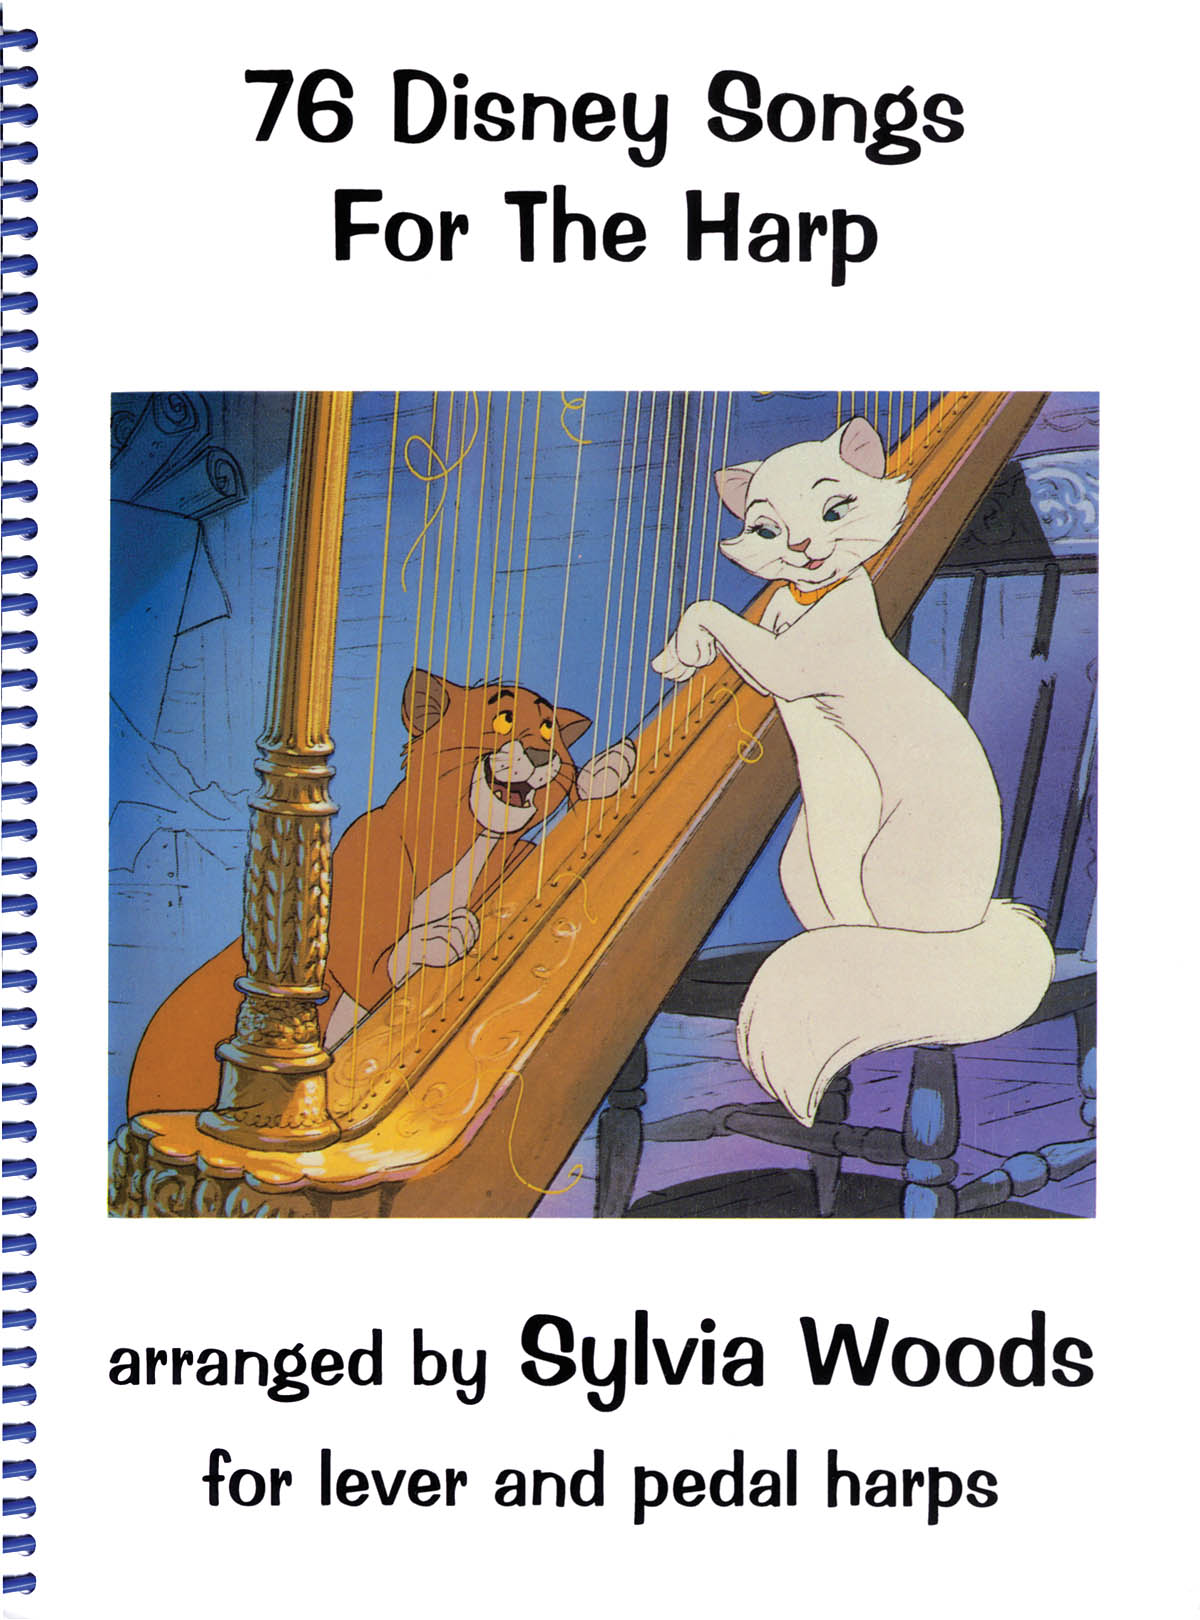 Sylvia Woods: 76 Disney Songs For The Harp